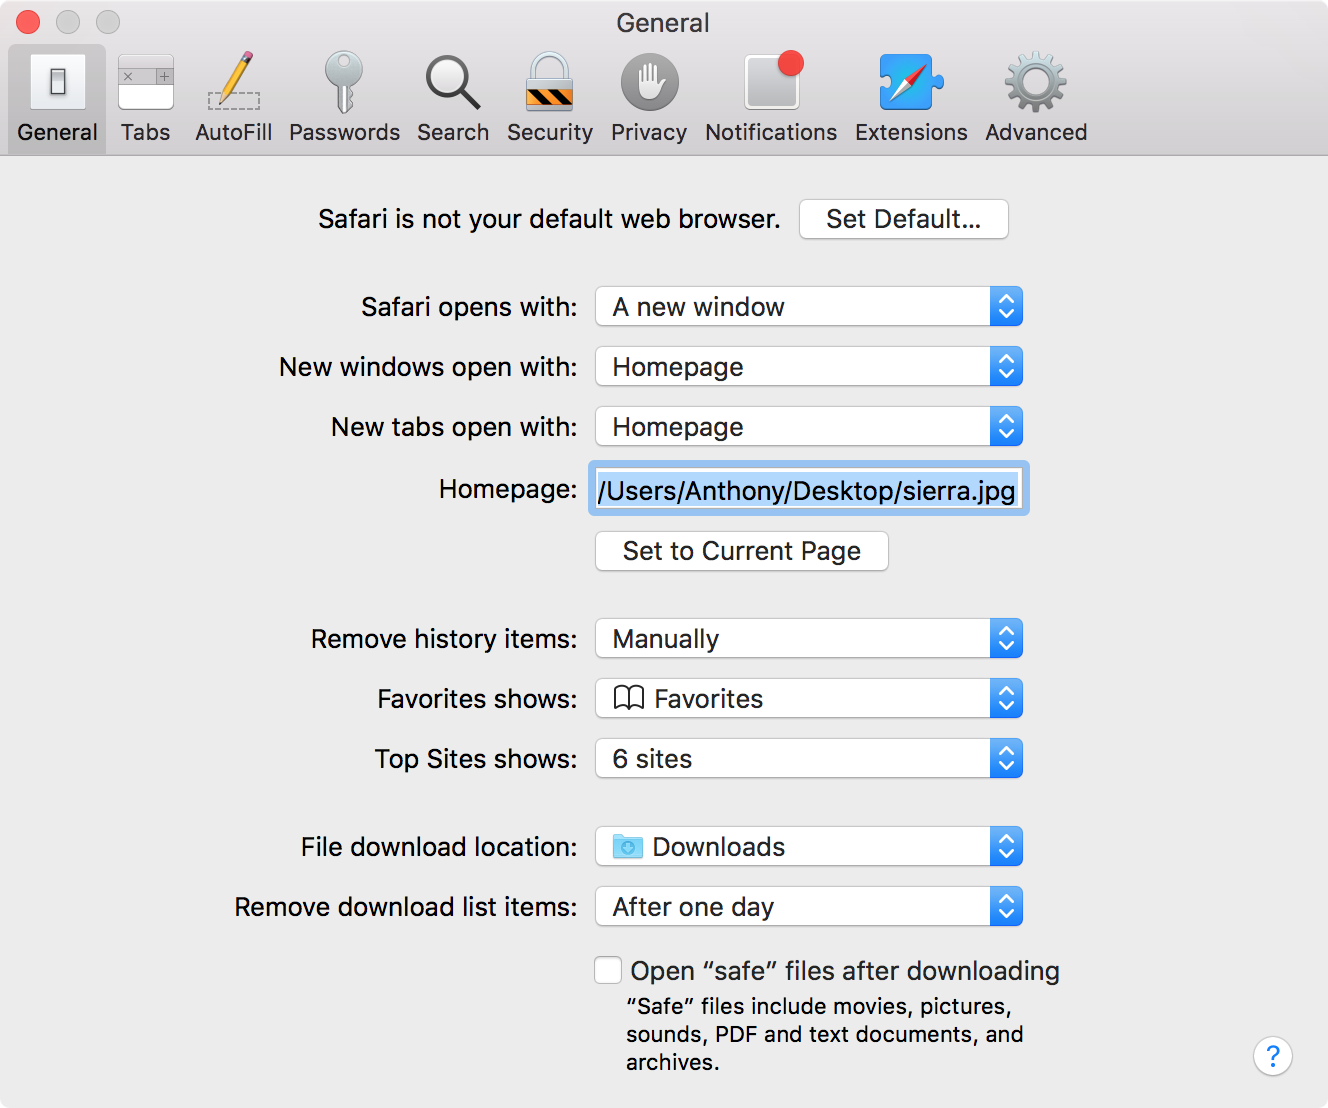 How to set up an image as your Home page in Safari on Mac